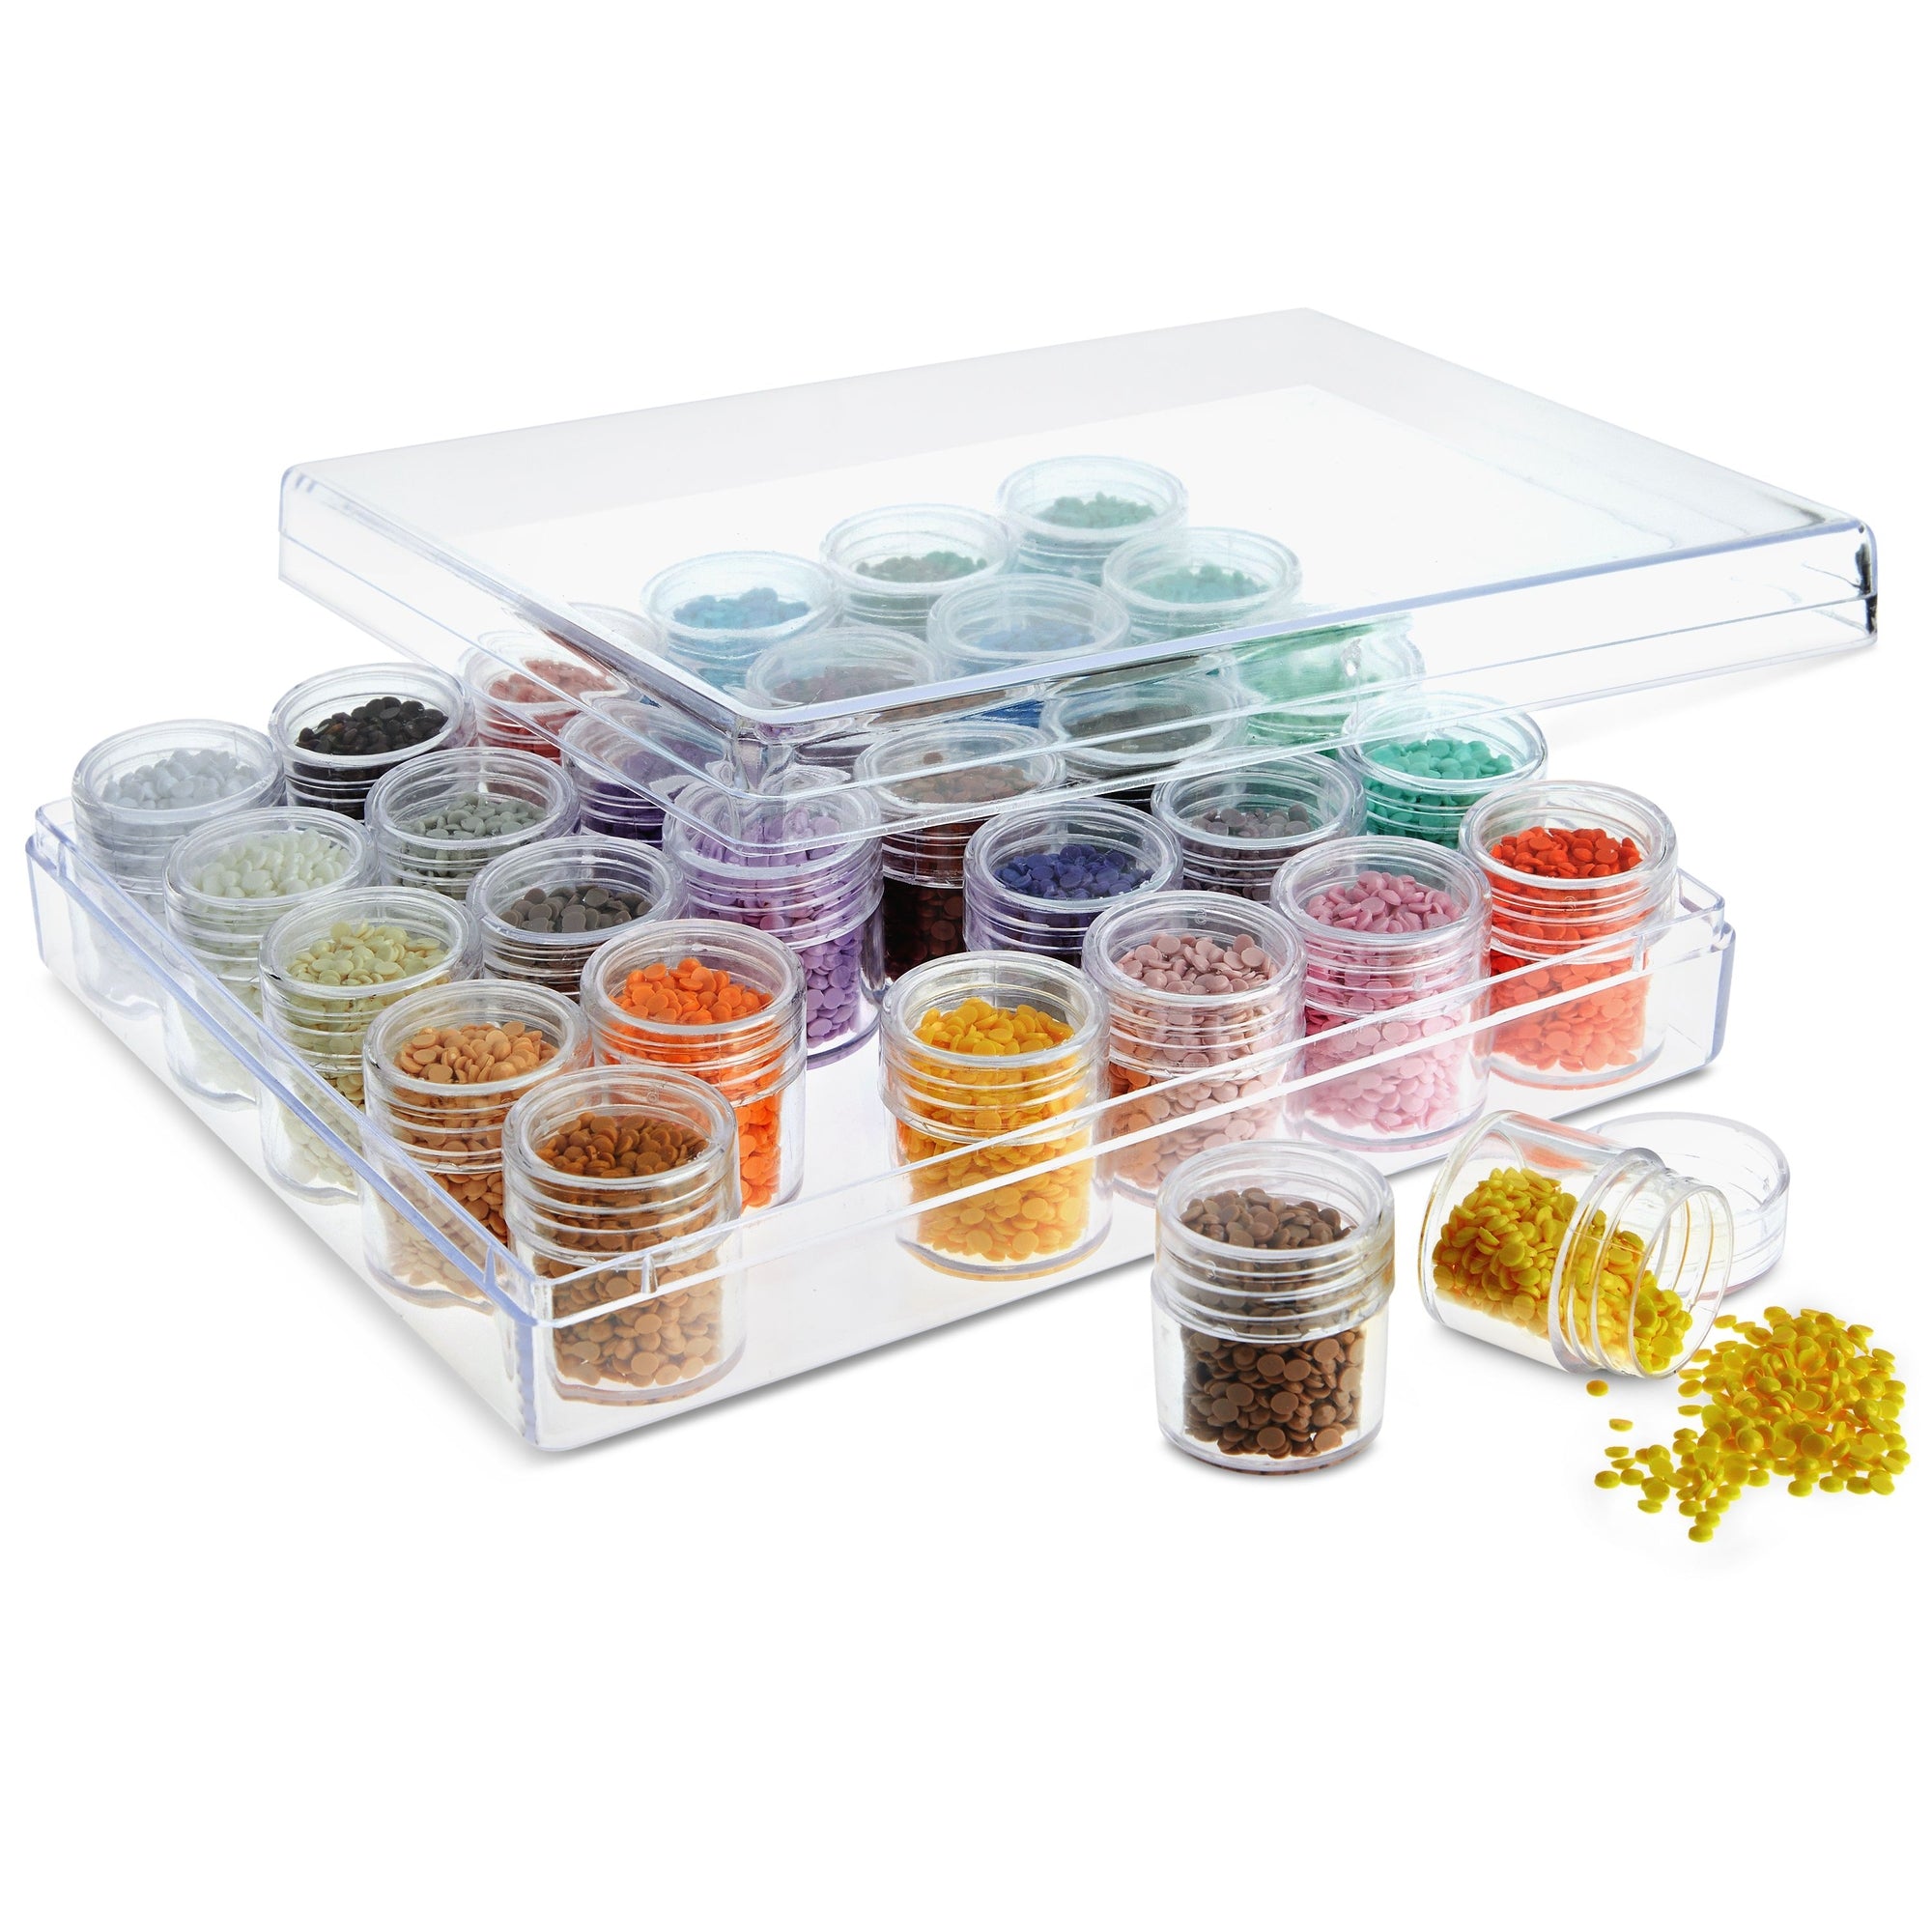 Clear Plastic Beads Storage Containers with Lids, 30 Jars, for Rhinestones, Glitter Art and Craft Organizer Box